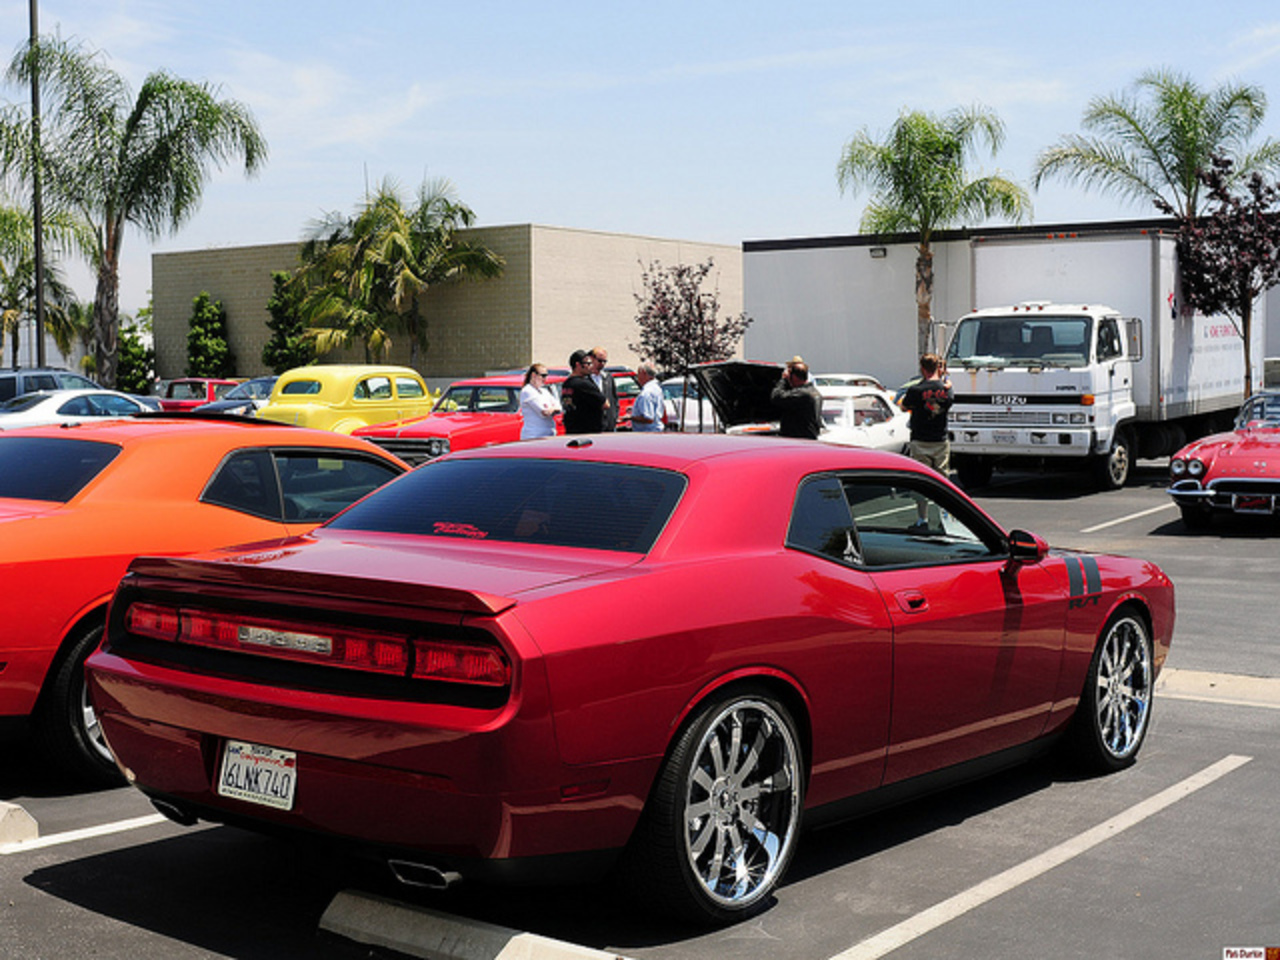 Flickr: The Dodge Vehicles Pool